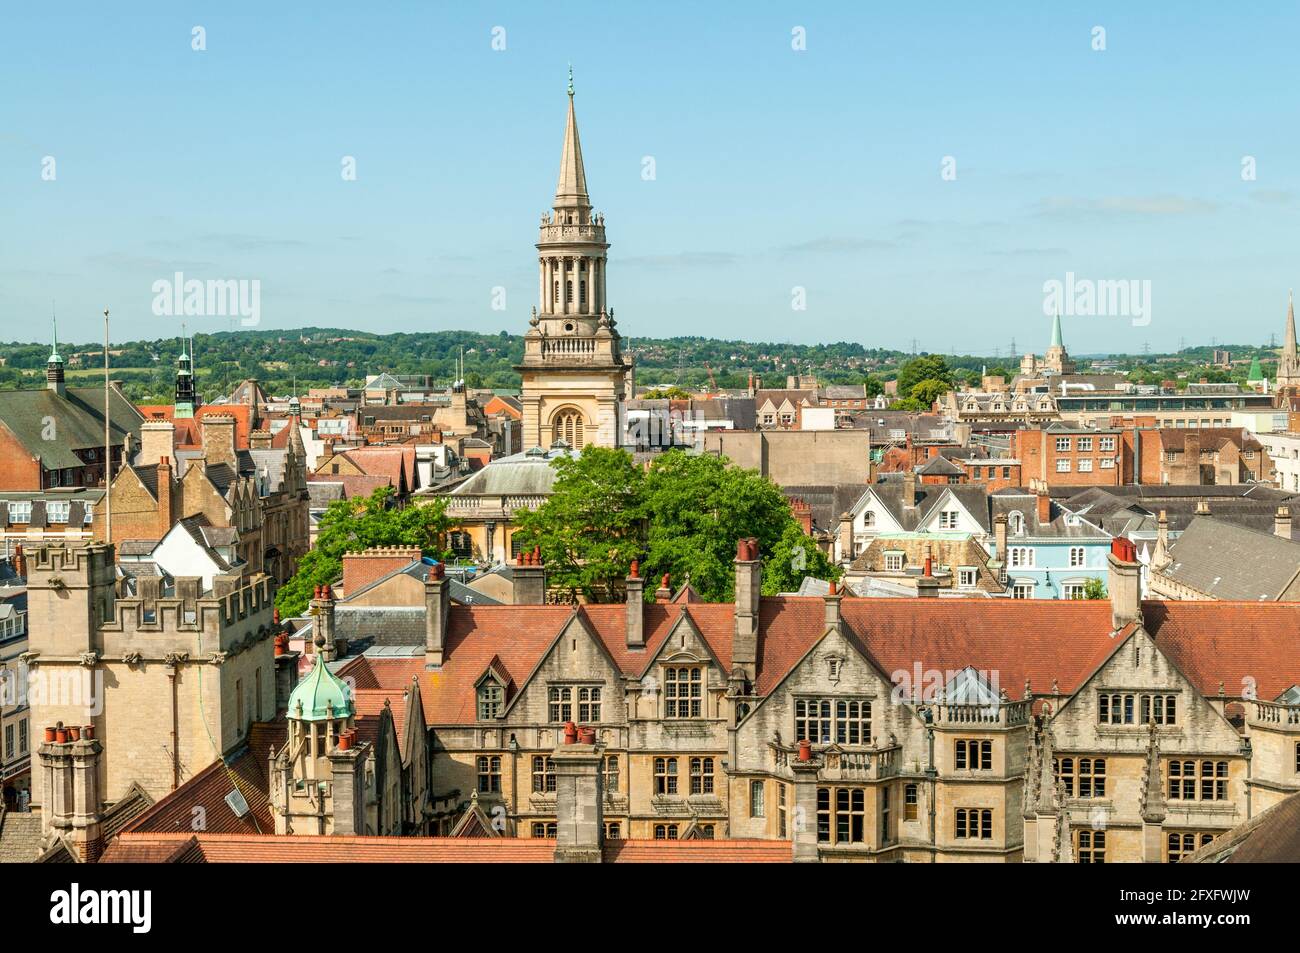 Skyline of Oxford from St Mary's Tower, Oxford, Oxfordshire, England Stock Photo